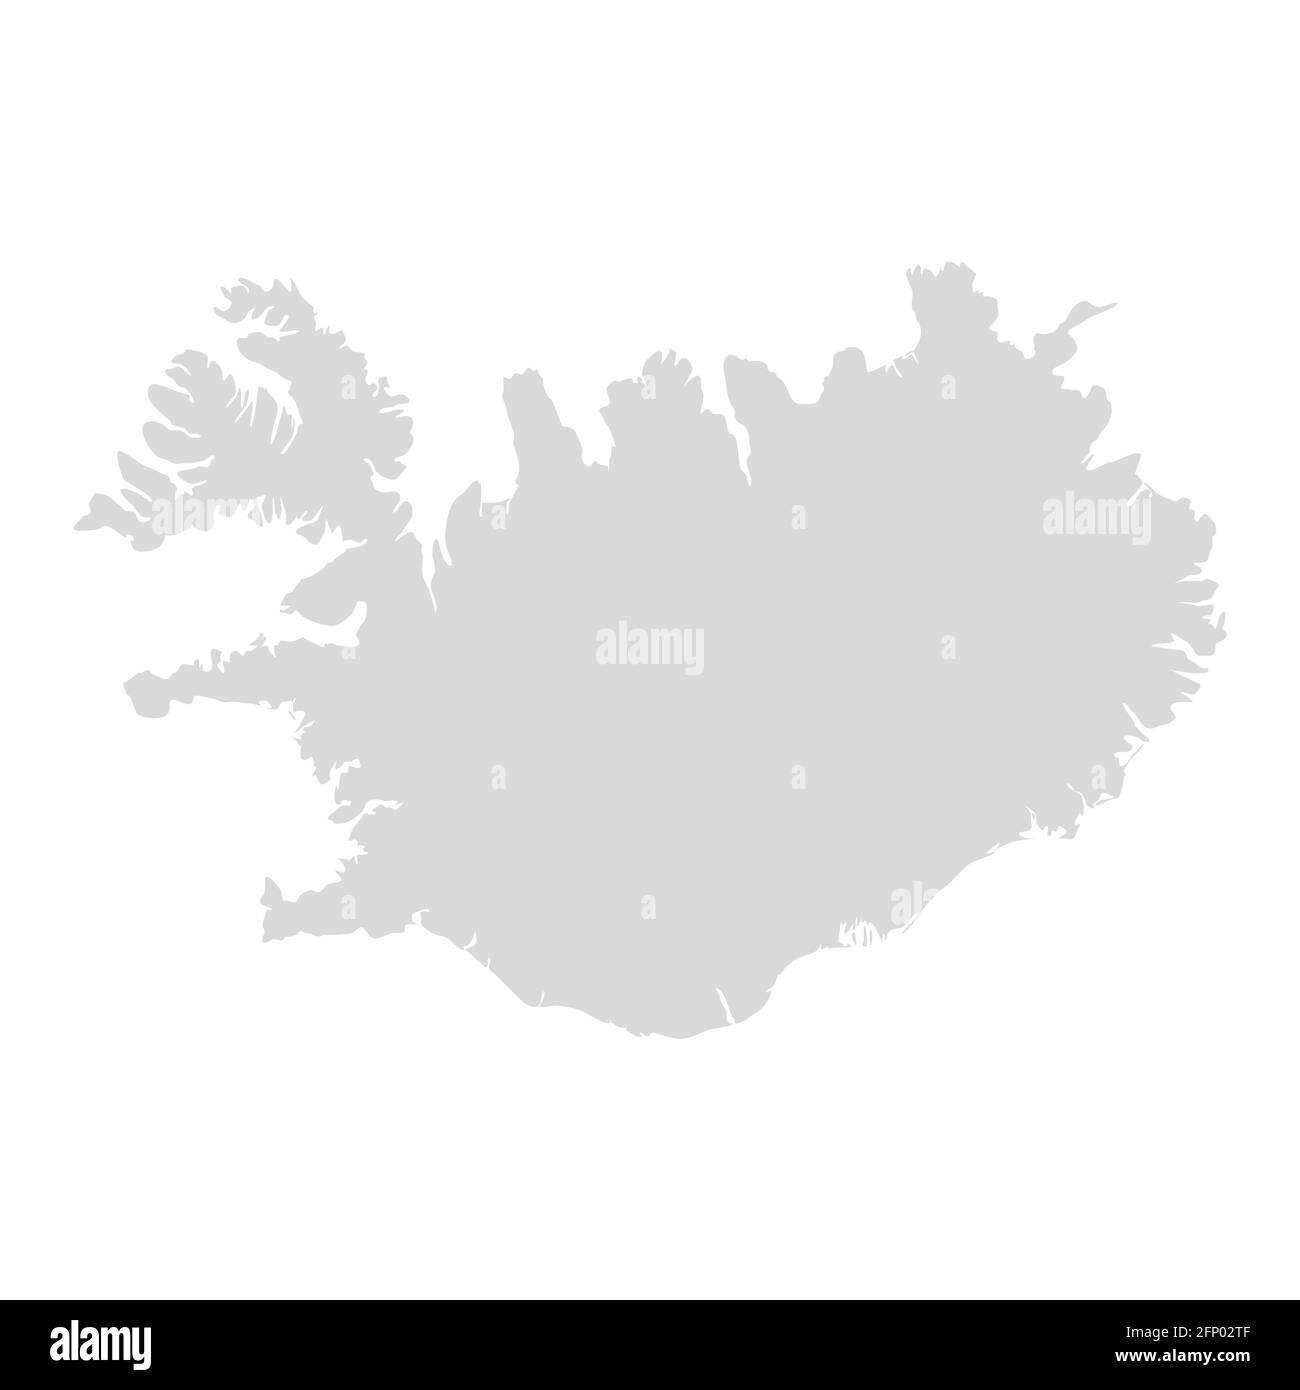 Iceland vector map icon. Iceland country flat europe map silhouette Stock Vector